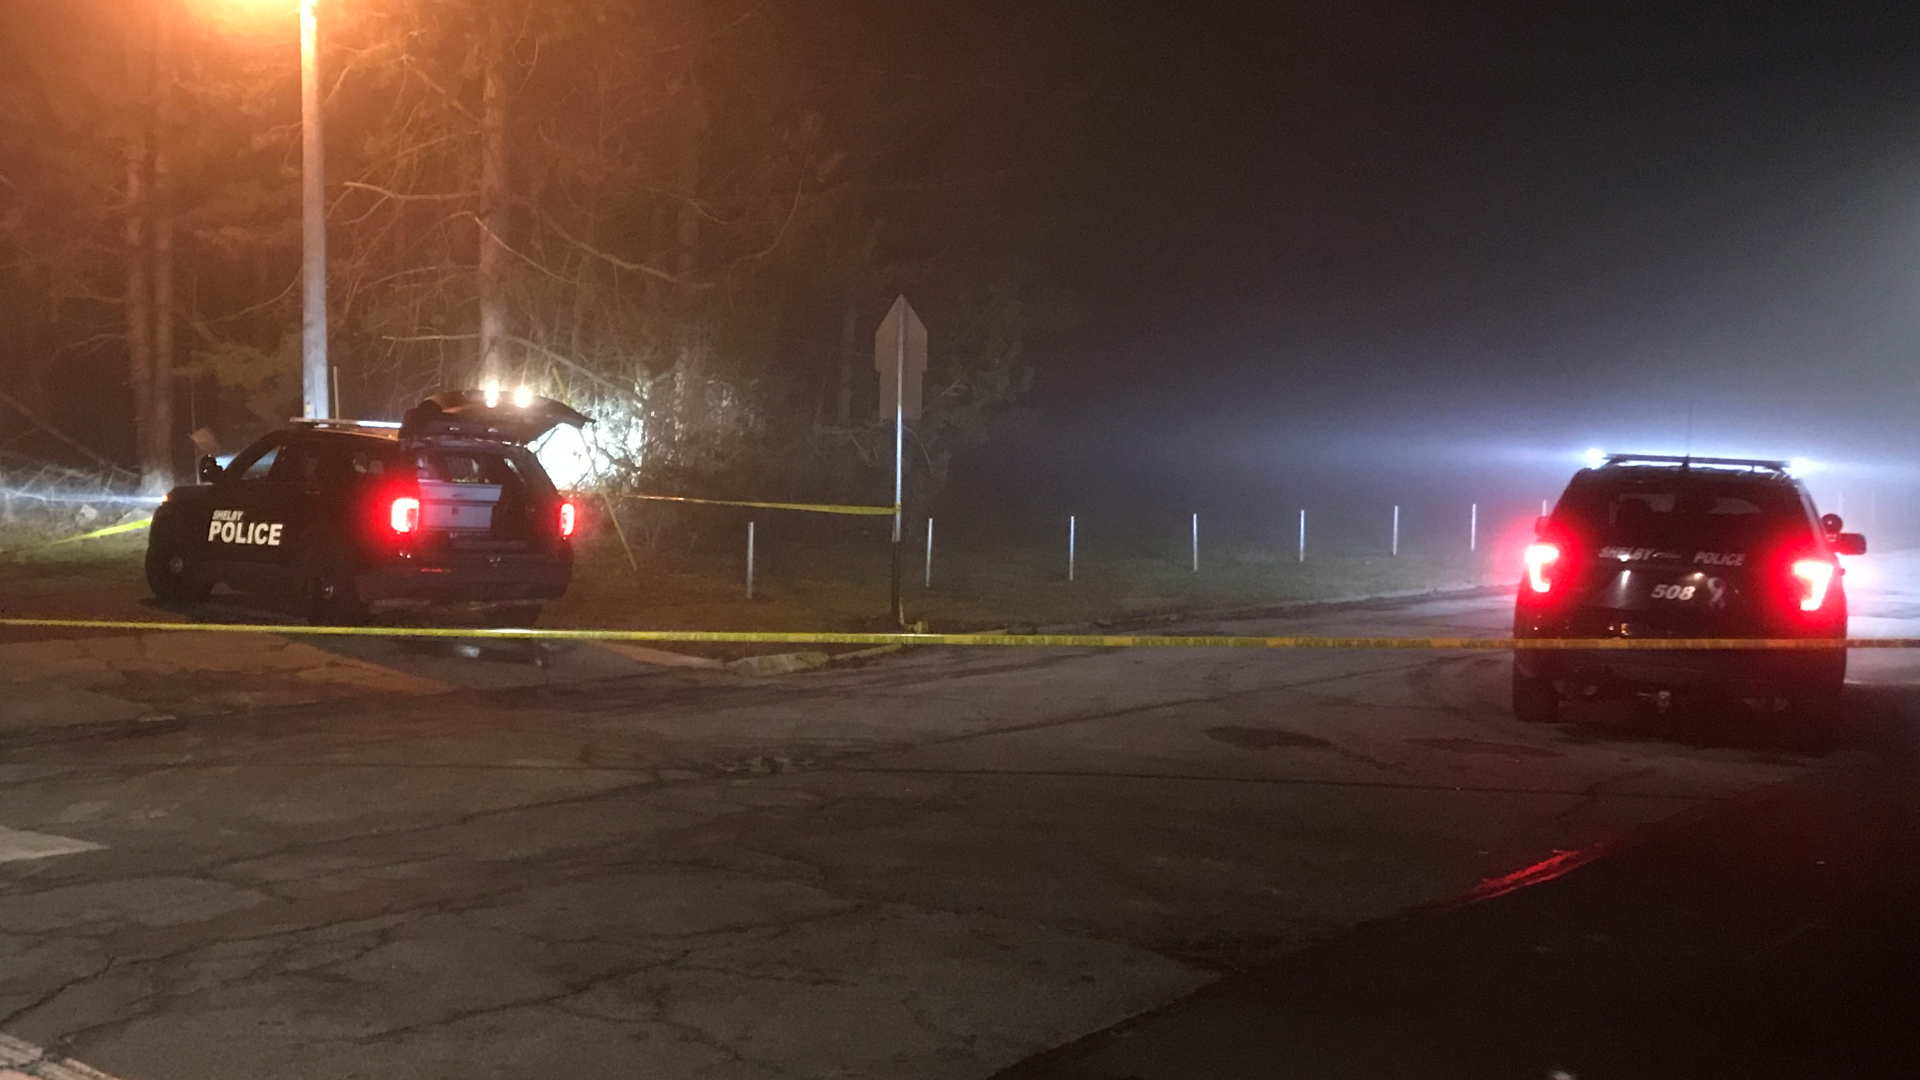 Shelby police and the Ohio Bureau of Criminal Investigation are investigating after a man pointed a rifle at police Tuesday night in Richland County.